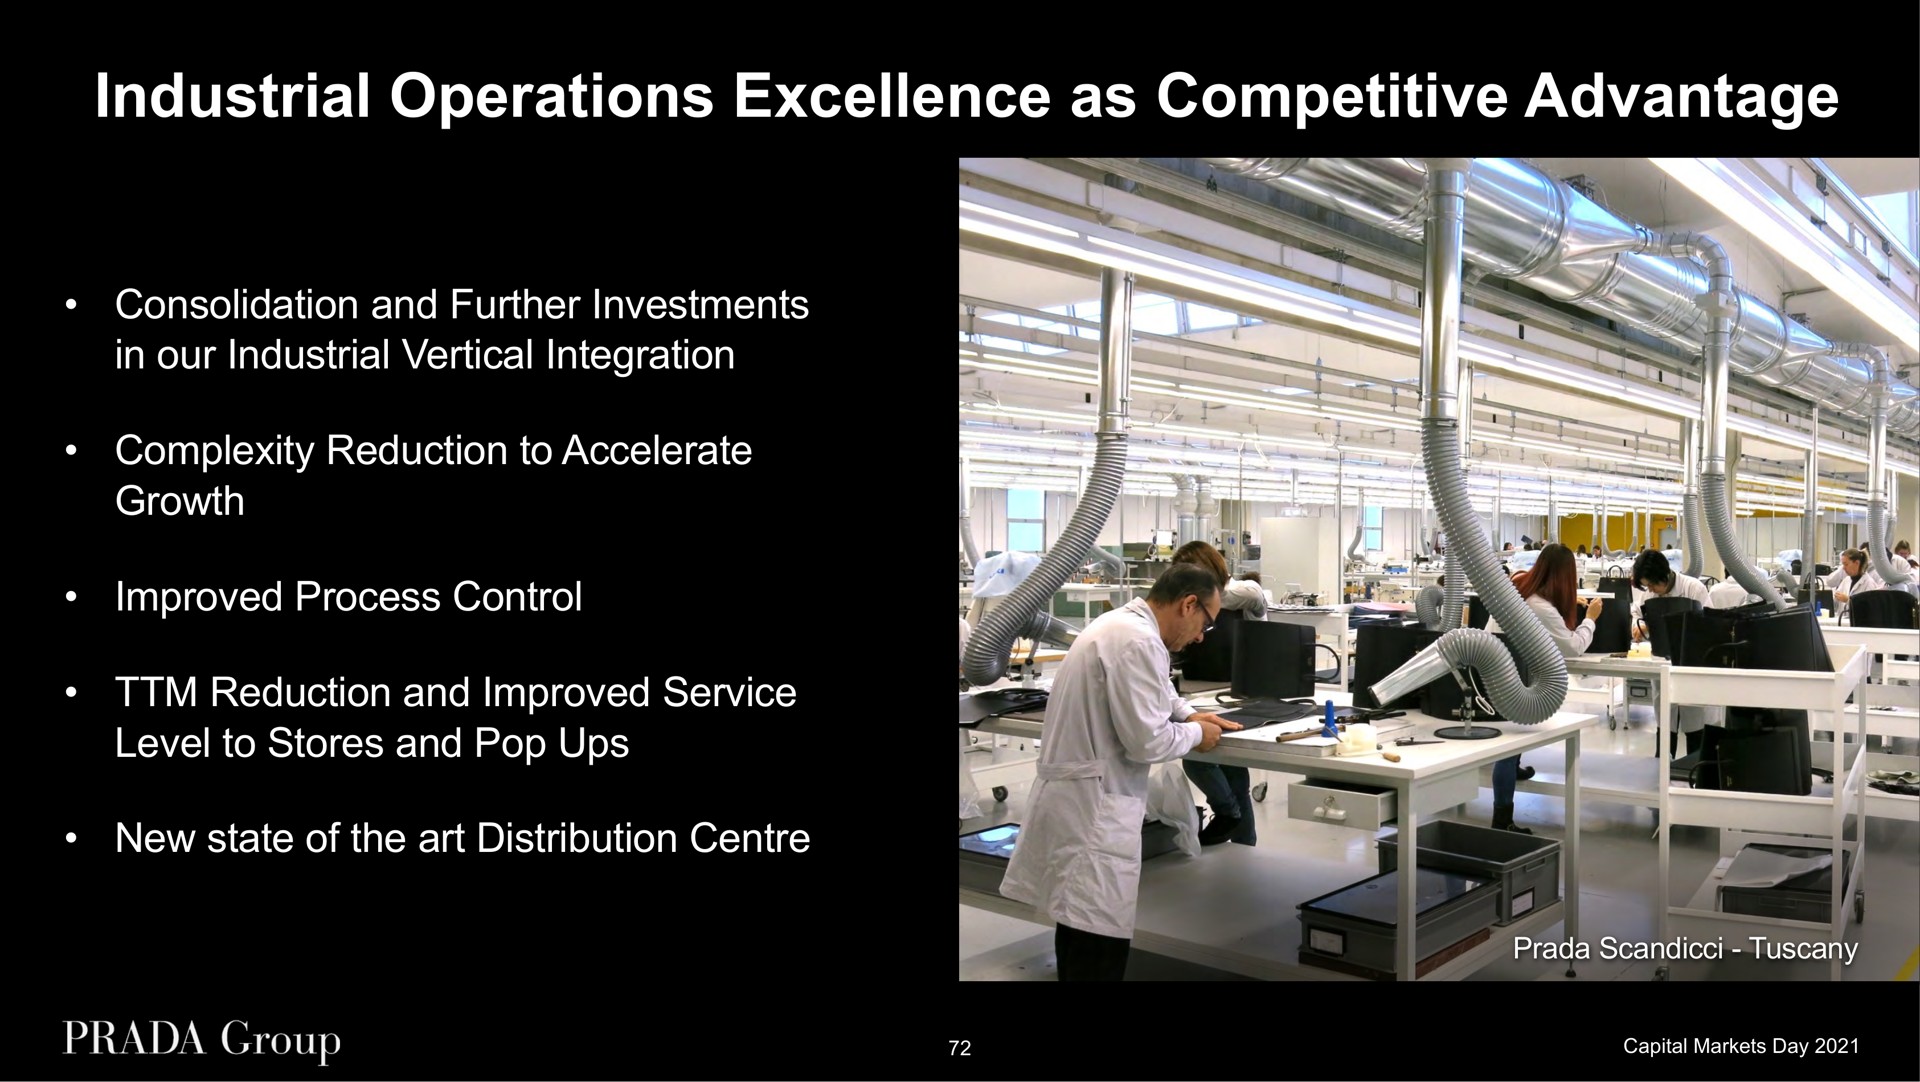 industrial operations excellence as competitive advantage consolidation and further investments in our industrial vertical integration complexity reduction to accelerate growth improved process control reduction and improved service level to stores and pop ups new state of the art distribution | Prada